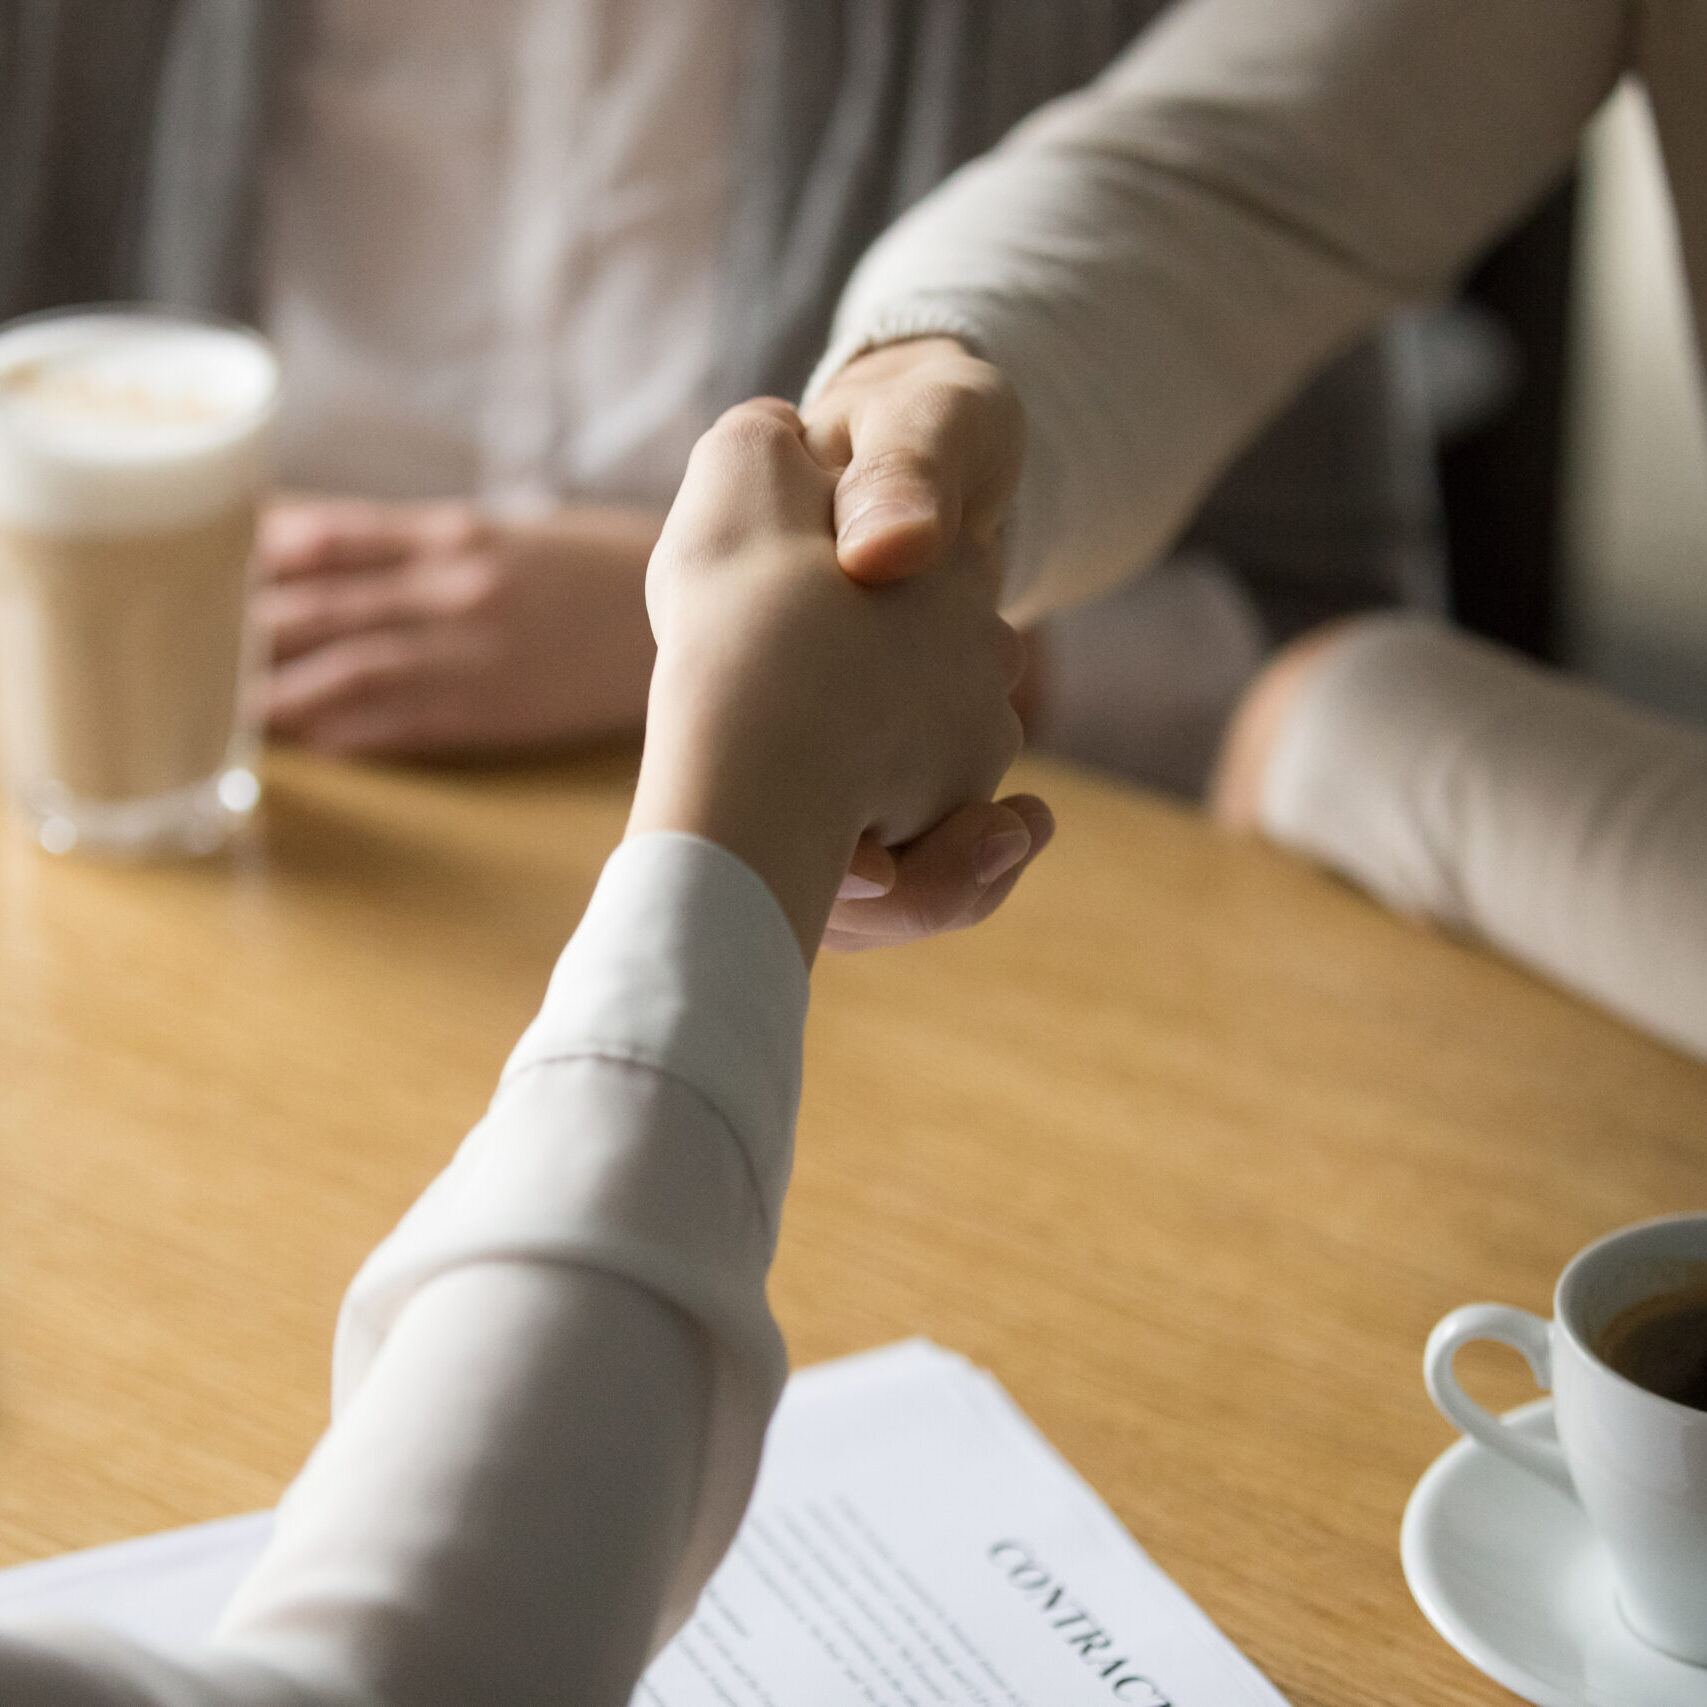 Couple handshaking businesswoman making investment deal in cafe, clients customers agree to sign contract shaking hands with mortgage insurance broker, estate agent or lawyer, close up view